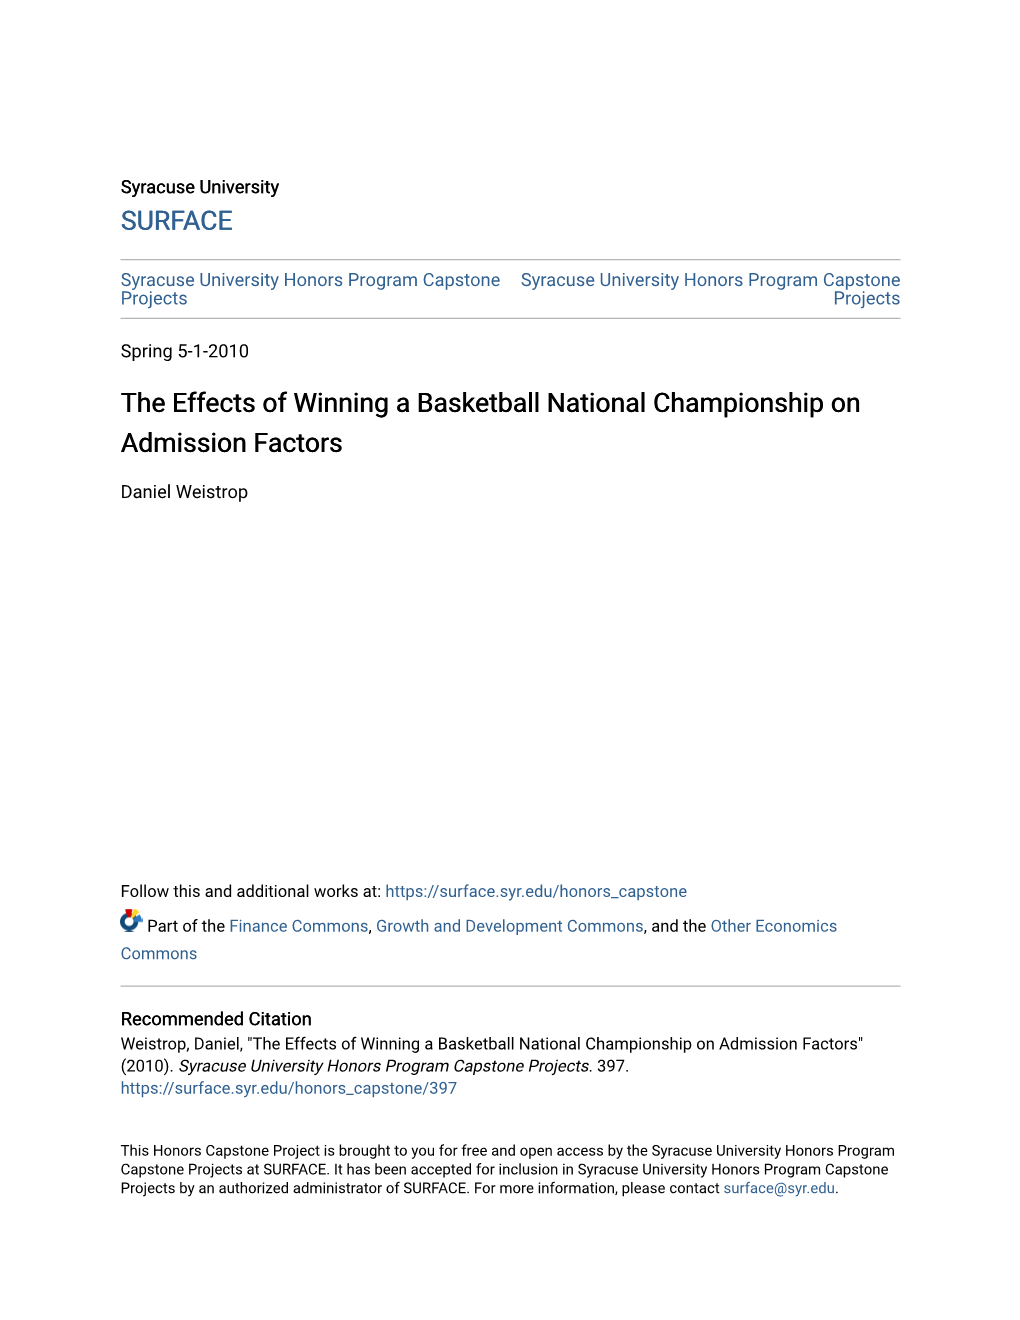 The Effects of Winning a Basketball National Championship on Admission Factors